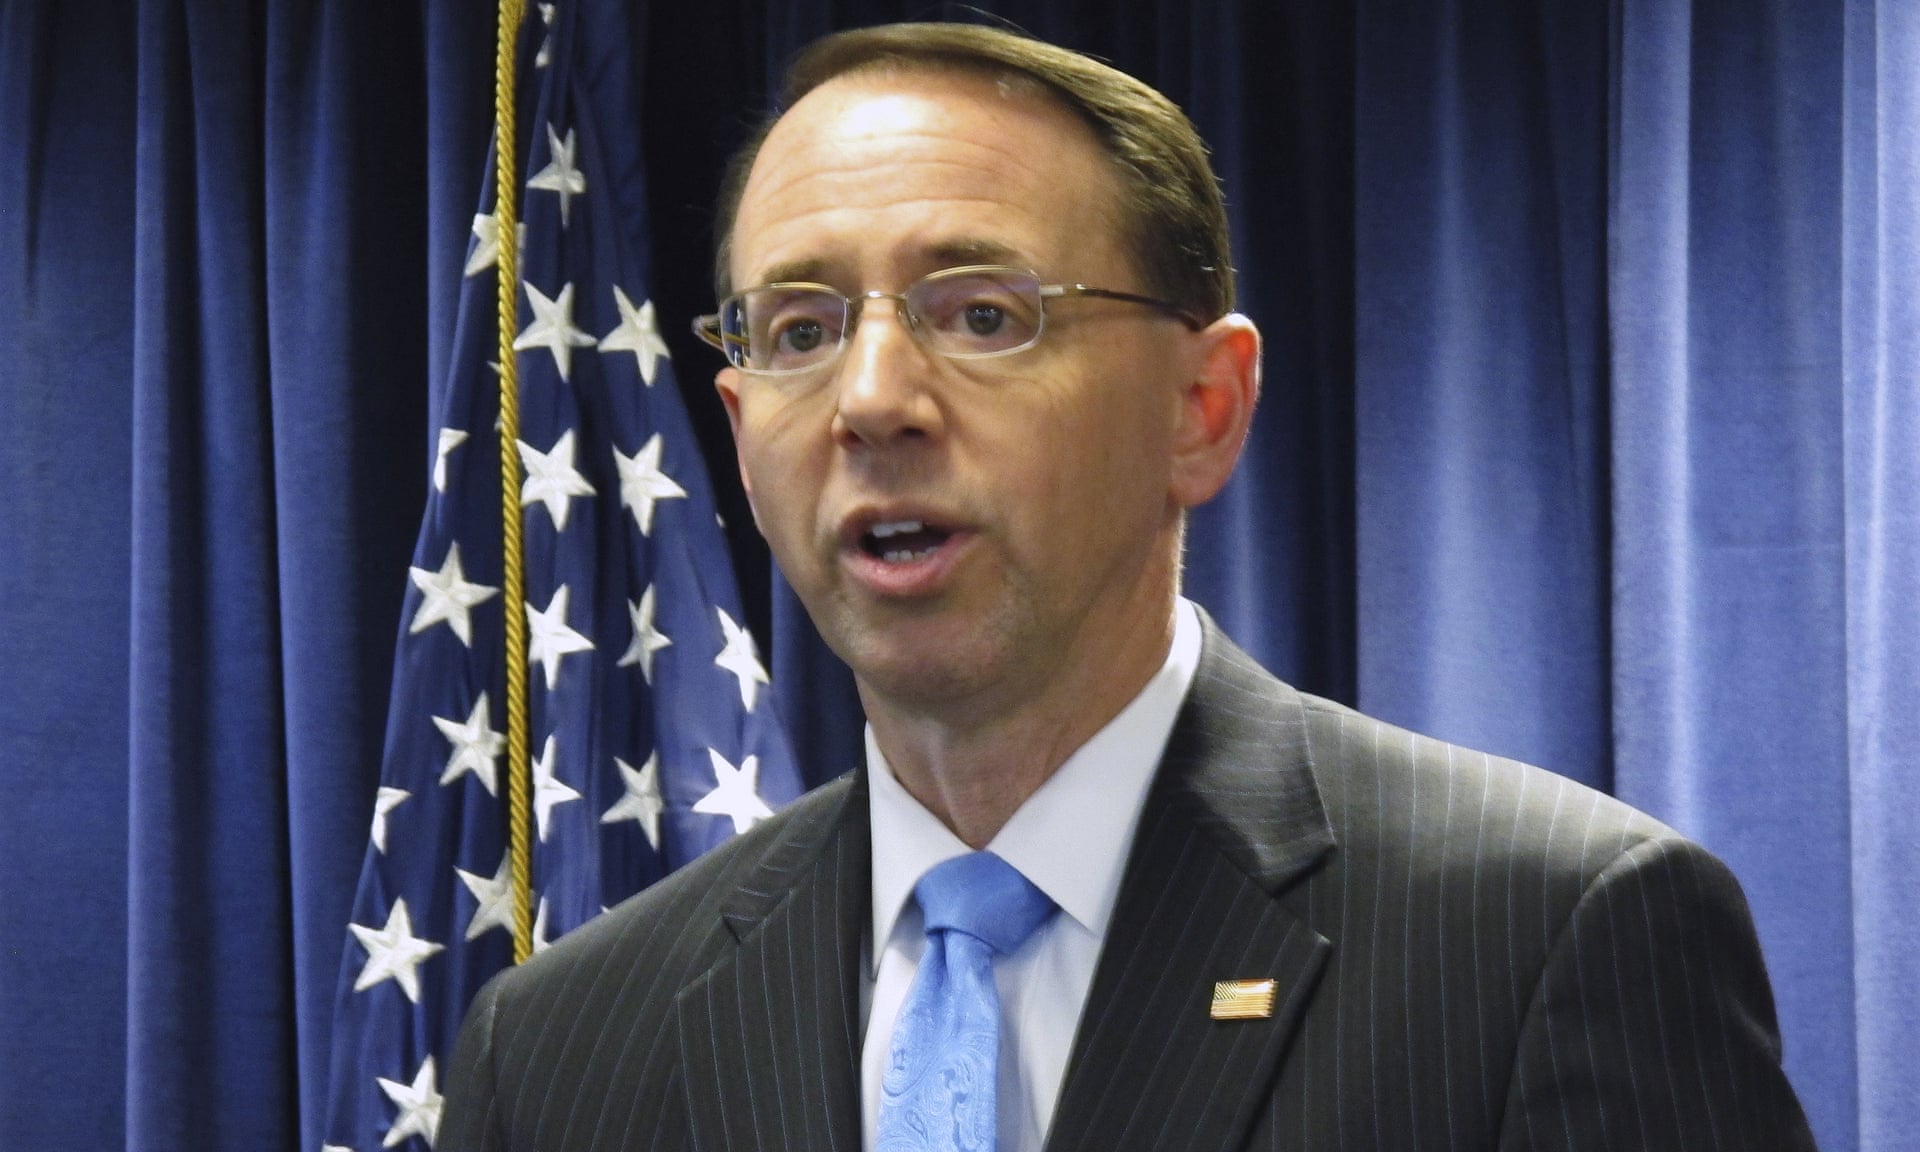  Maryland's US attorney, Rod Rosenstein, is known for his skill in handling public corruptions cases, as well as his apolitical approach, officials say. Photograph: Brian Witte/AP  